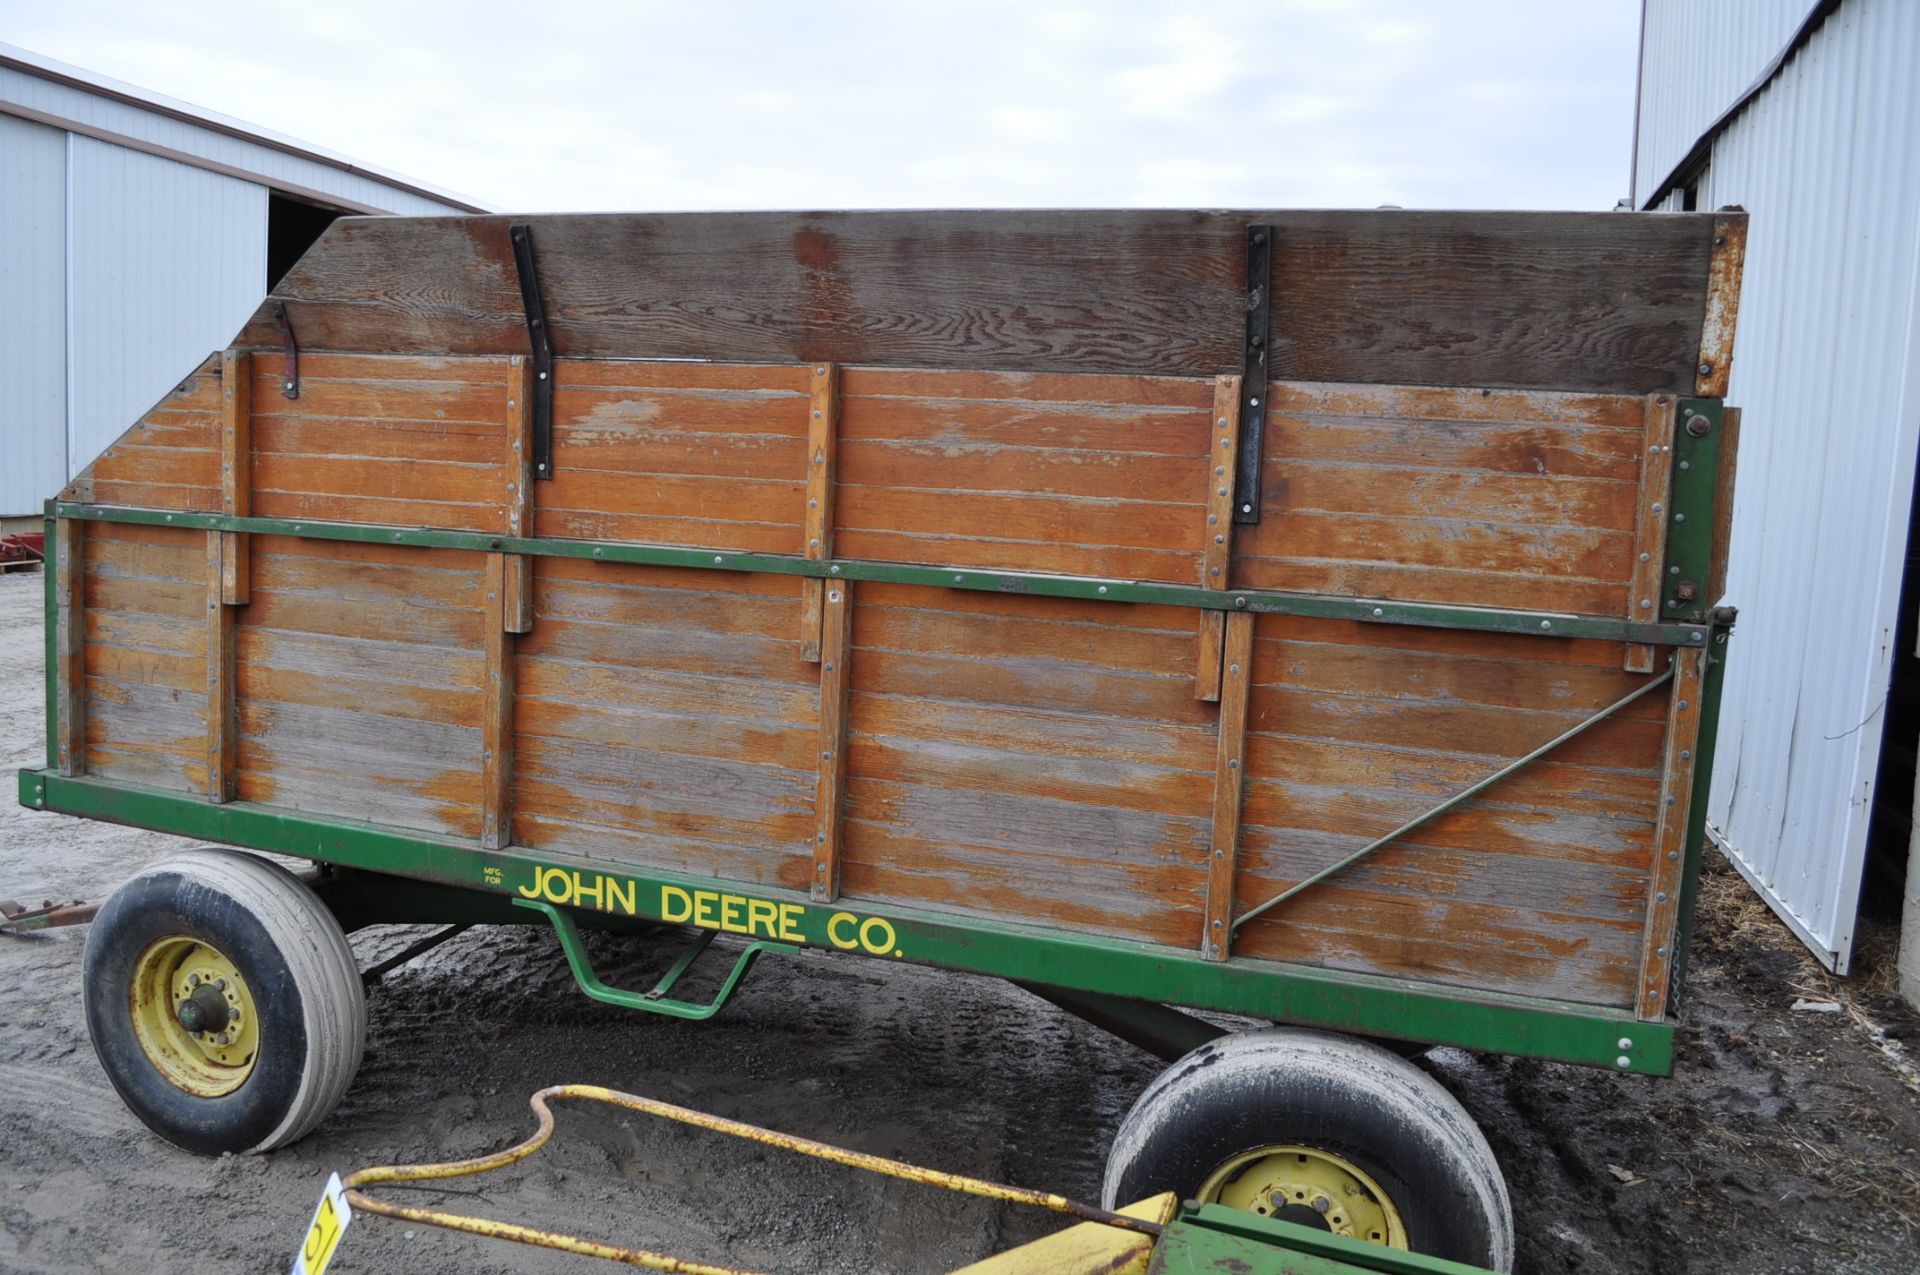 Silage wagon with John Deere gear and hoist - Image 4 of 11